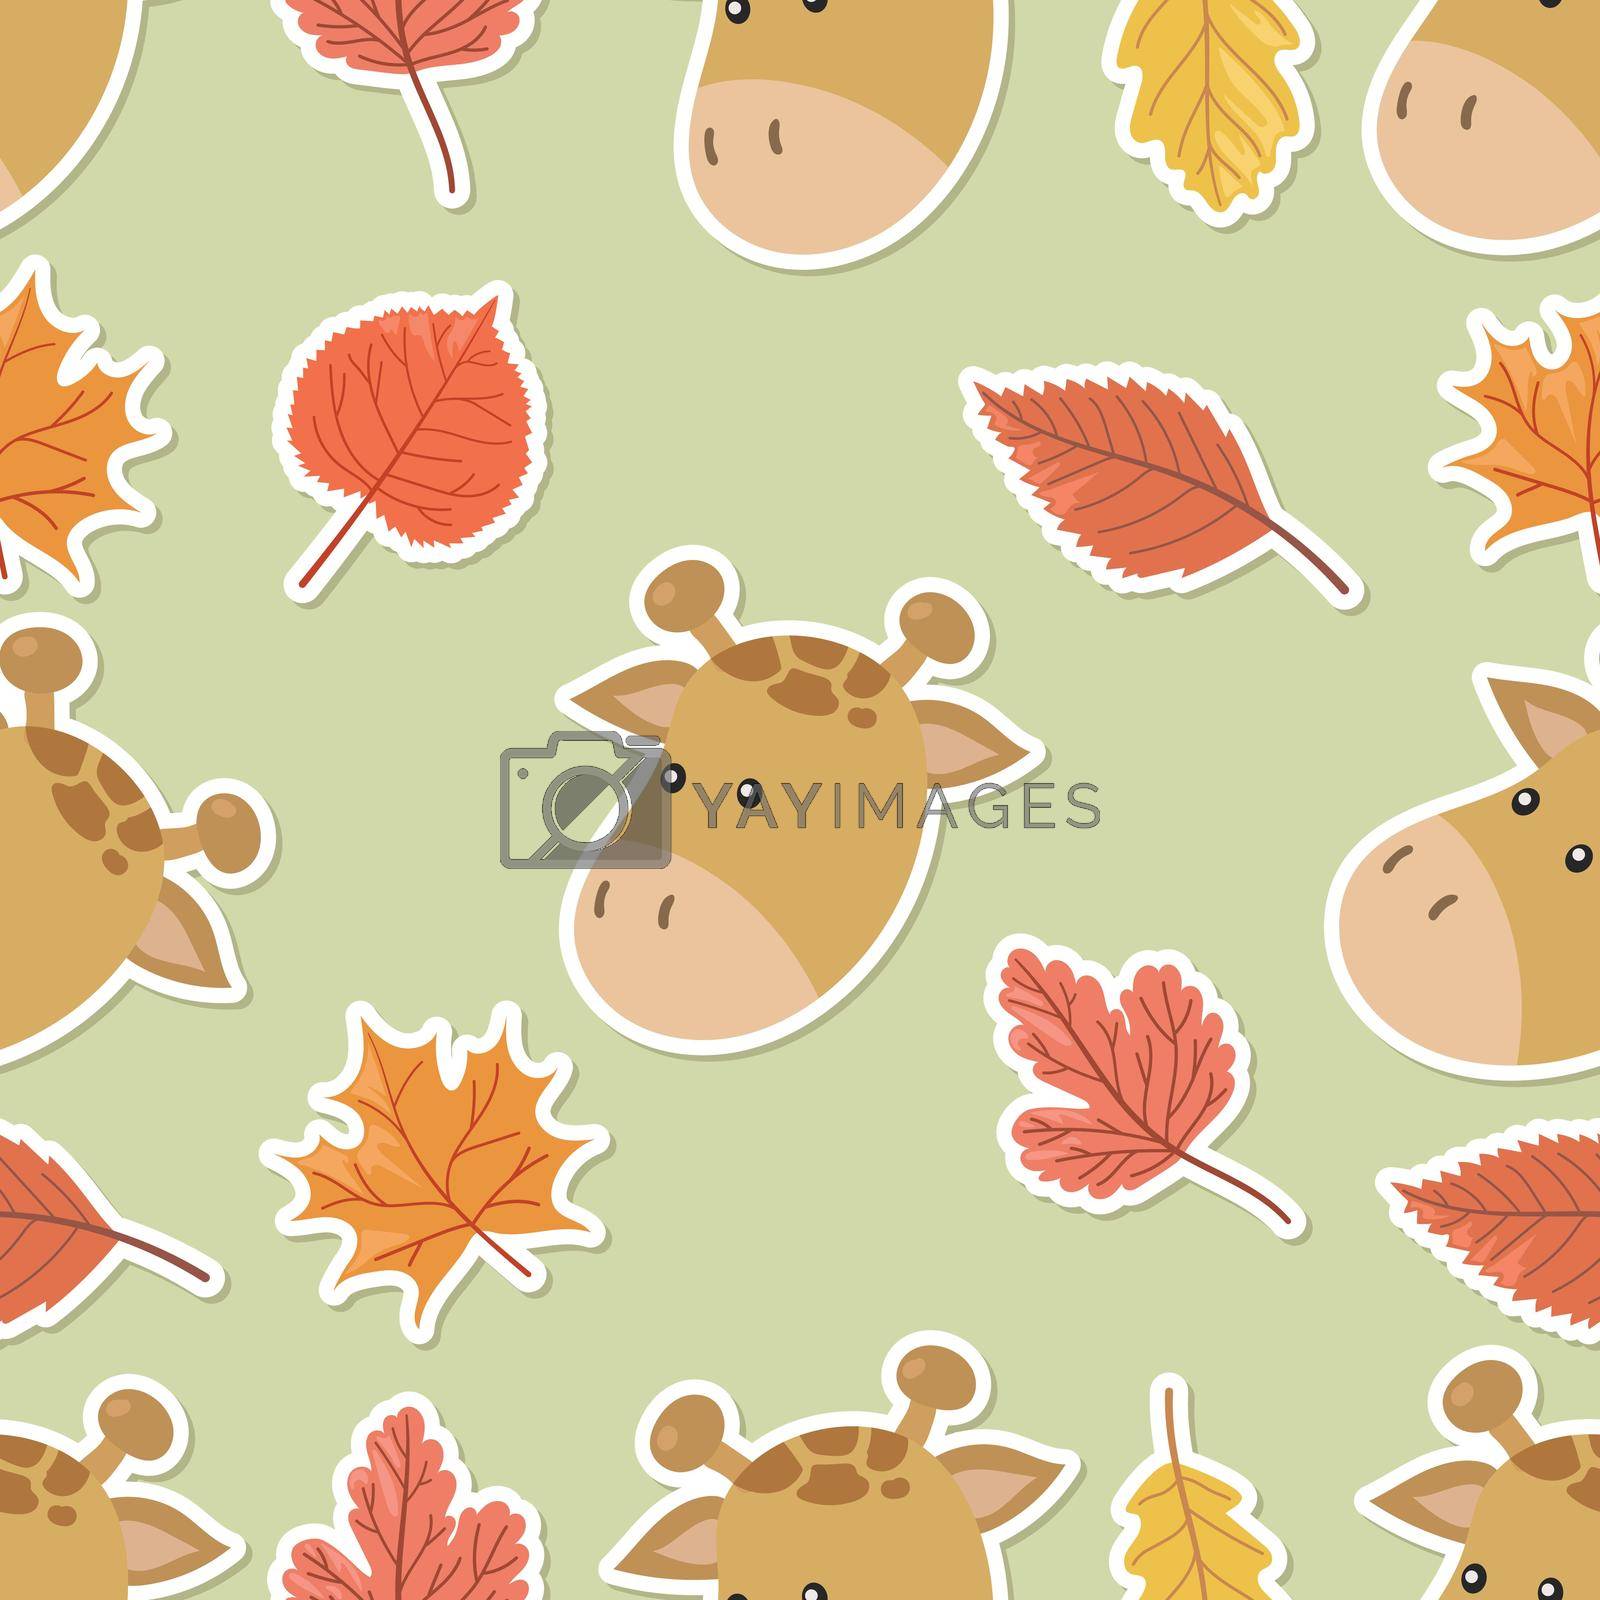 Royalty free image of Seamless doodle giraffe and leaf sticker cartoon pattern by valueinvestor